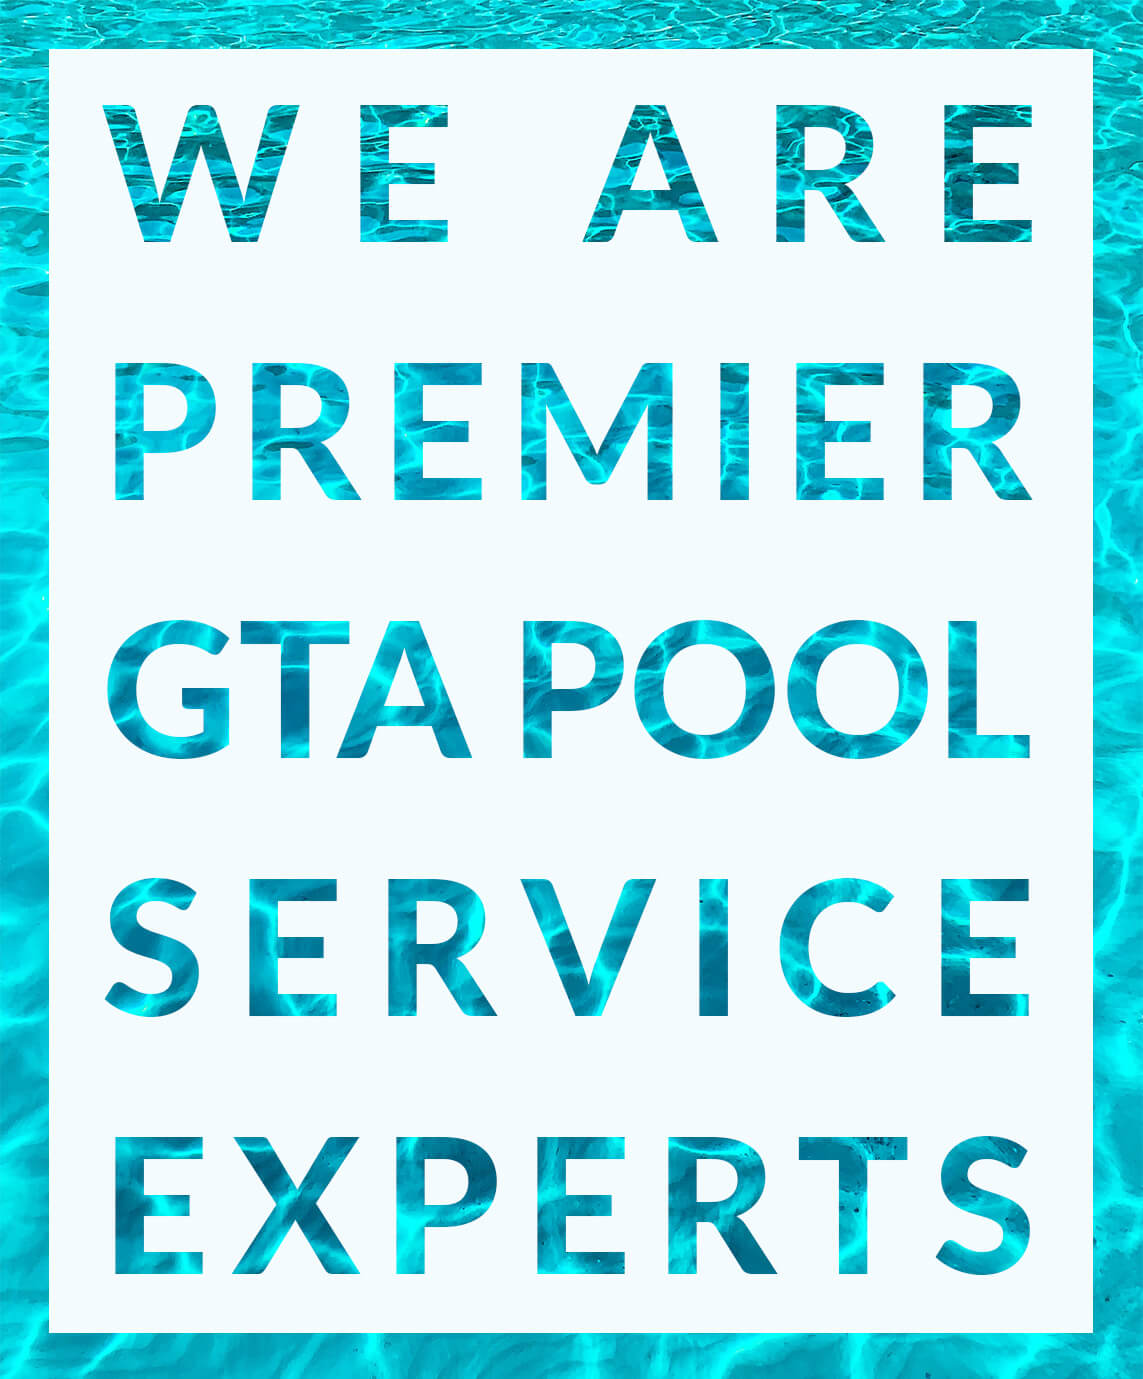 We are premier GTA pool service experts